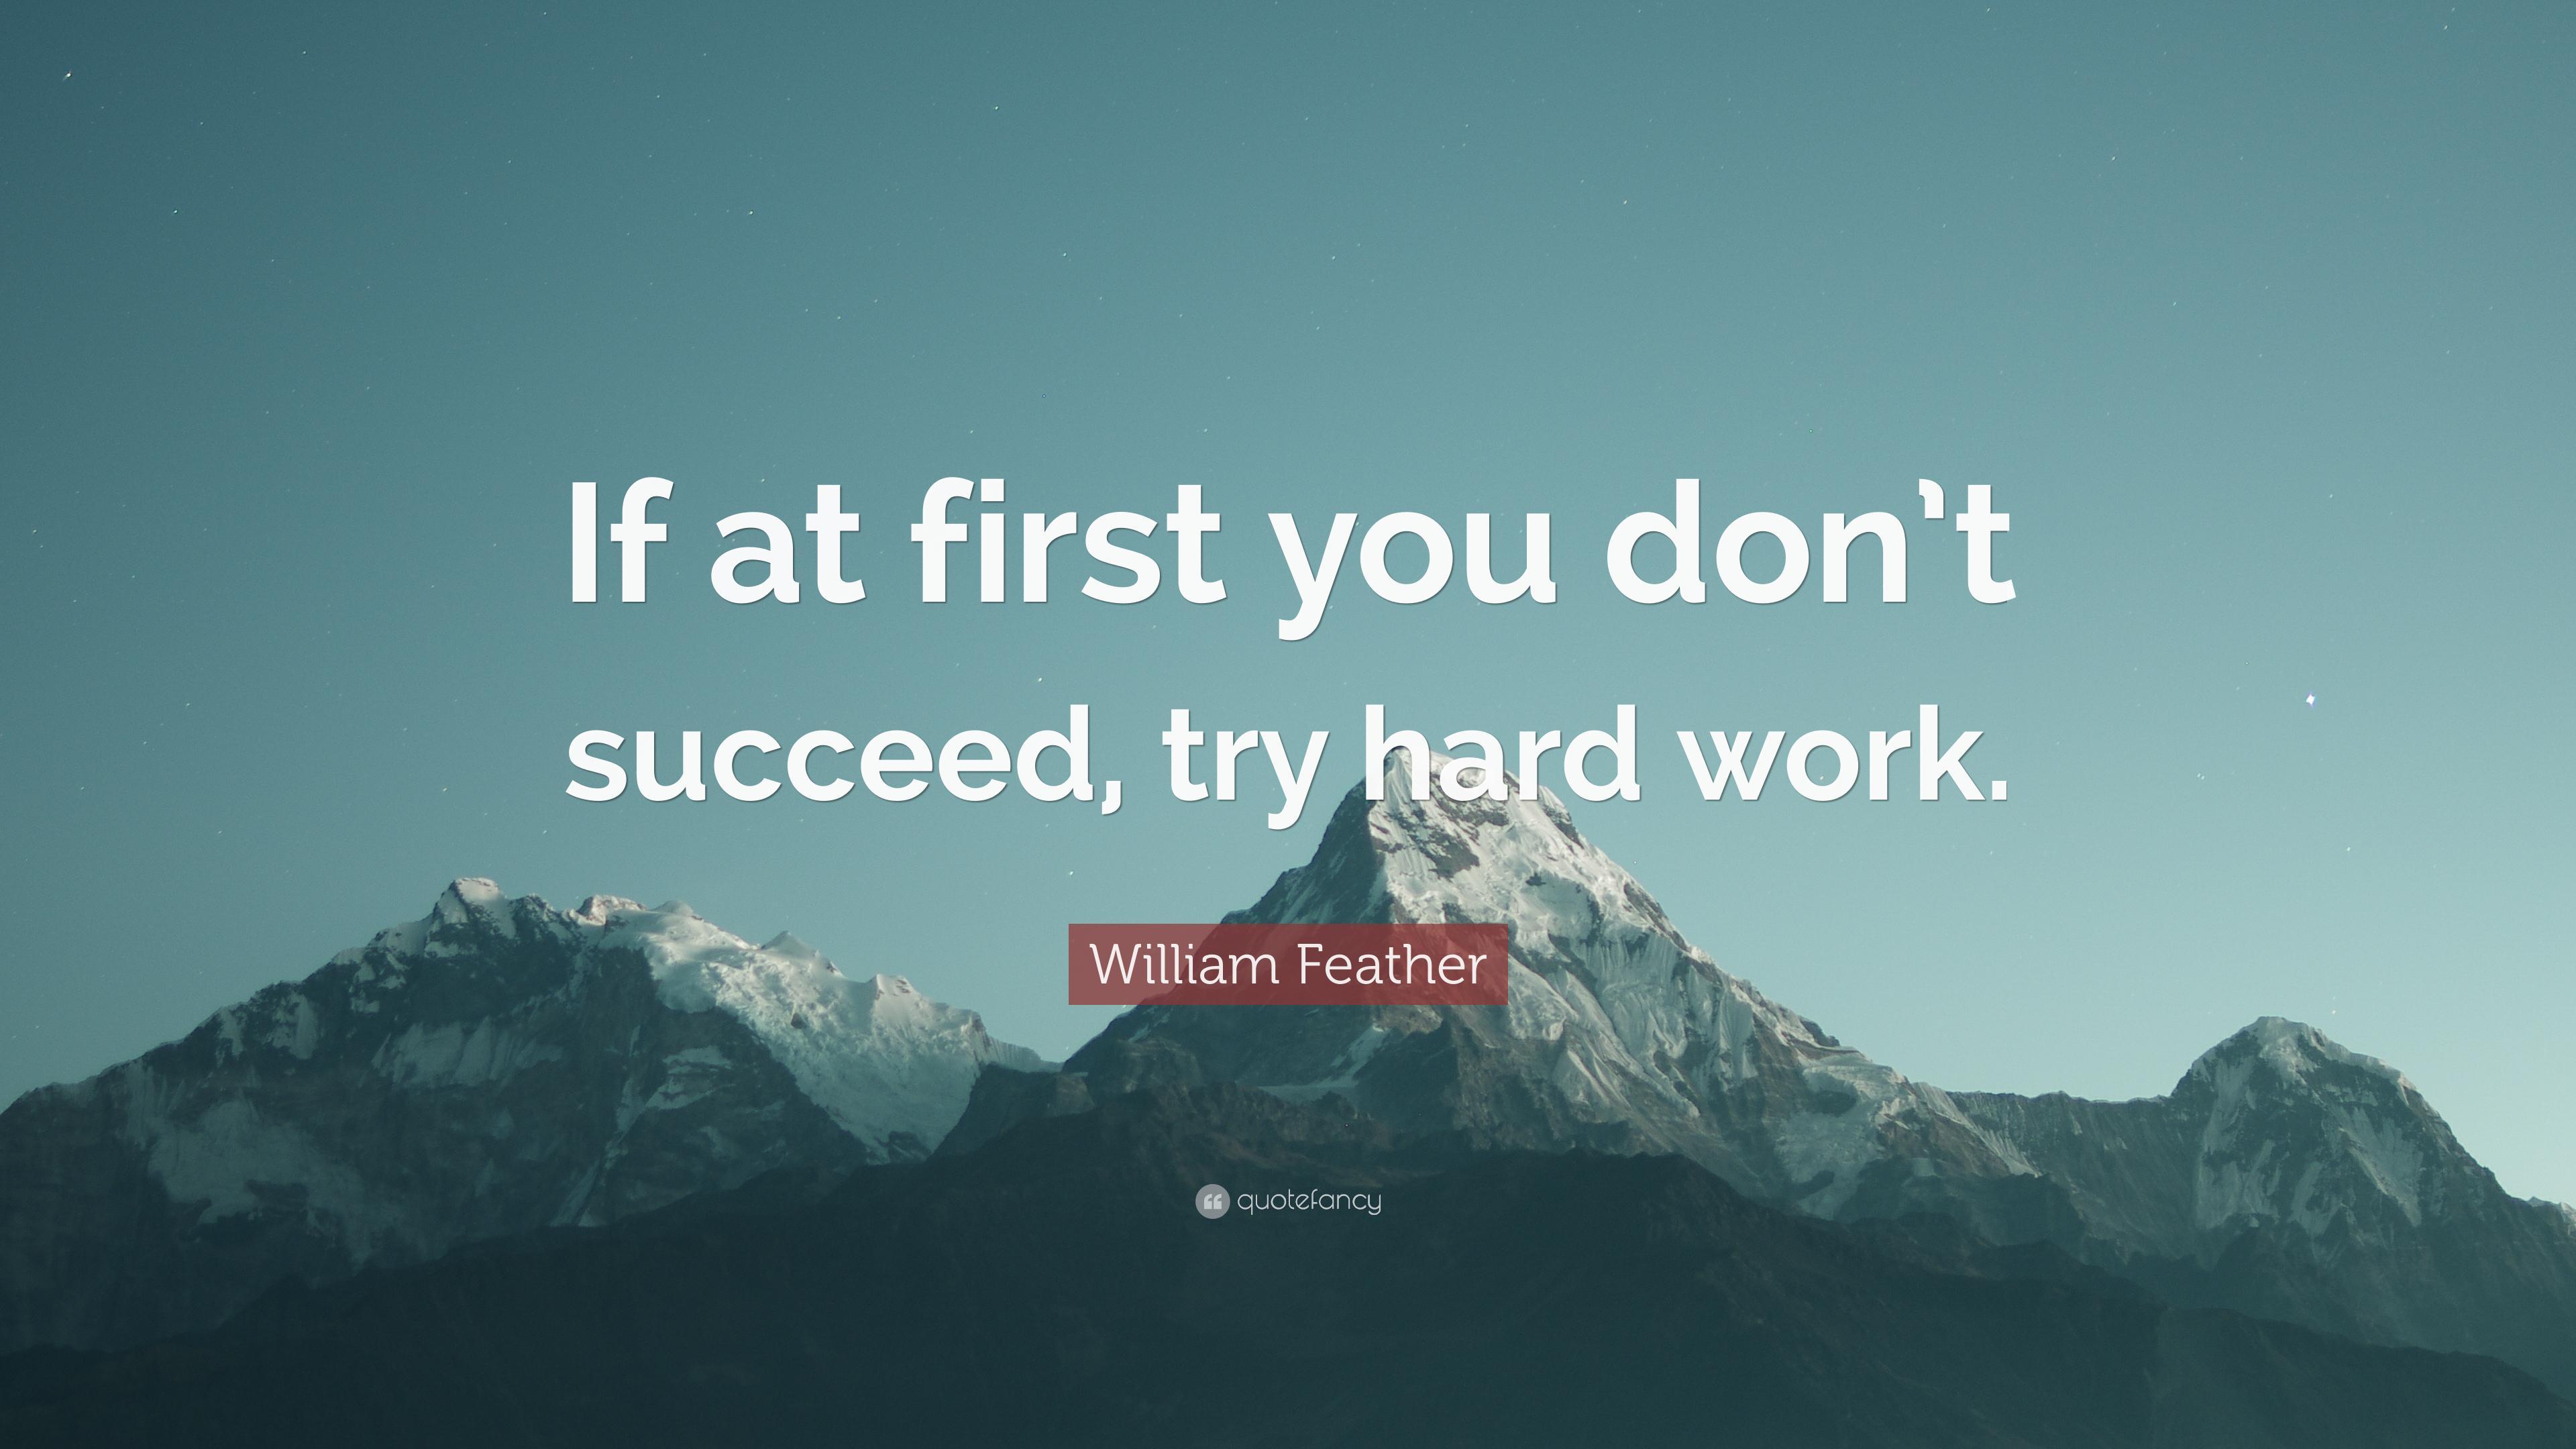 William Feather Quote: “If at first you don't succeed, try hard work